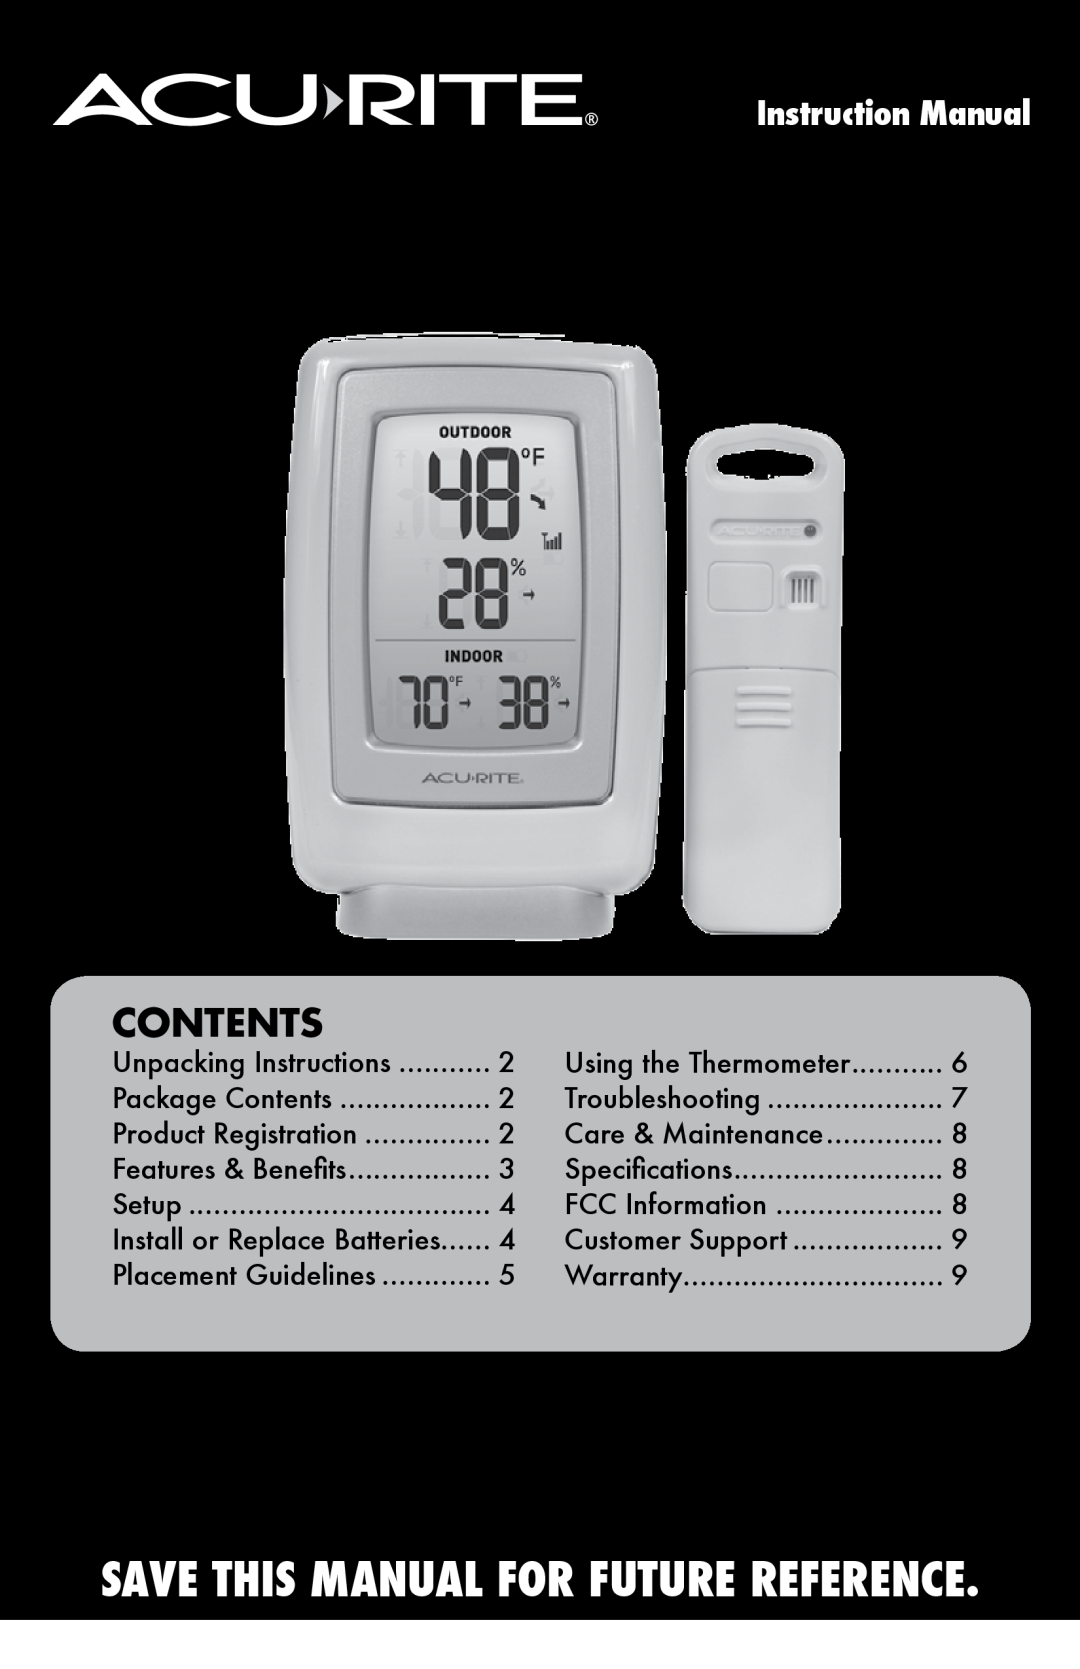 Acu-Rite instruction manual Contents, model 00411/00609SBDIA/00611A3, Wireless Thermometer 